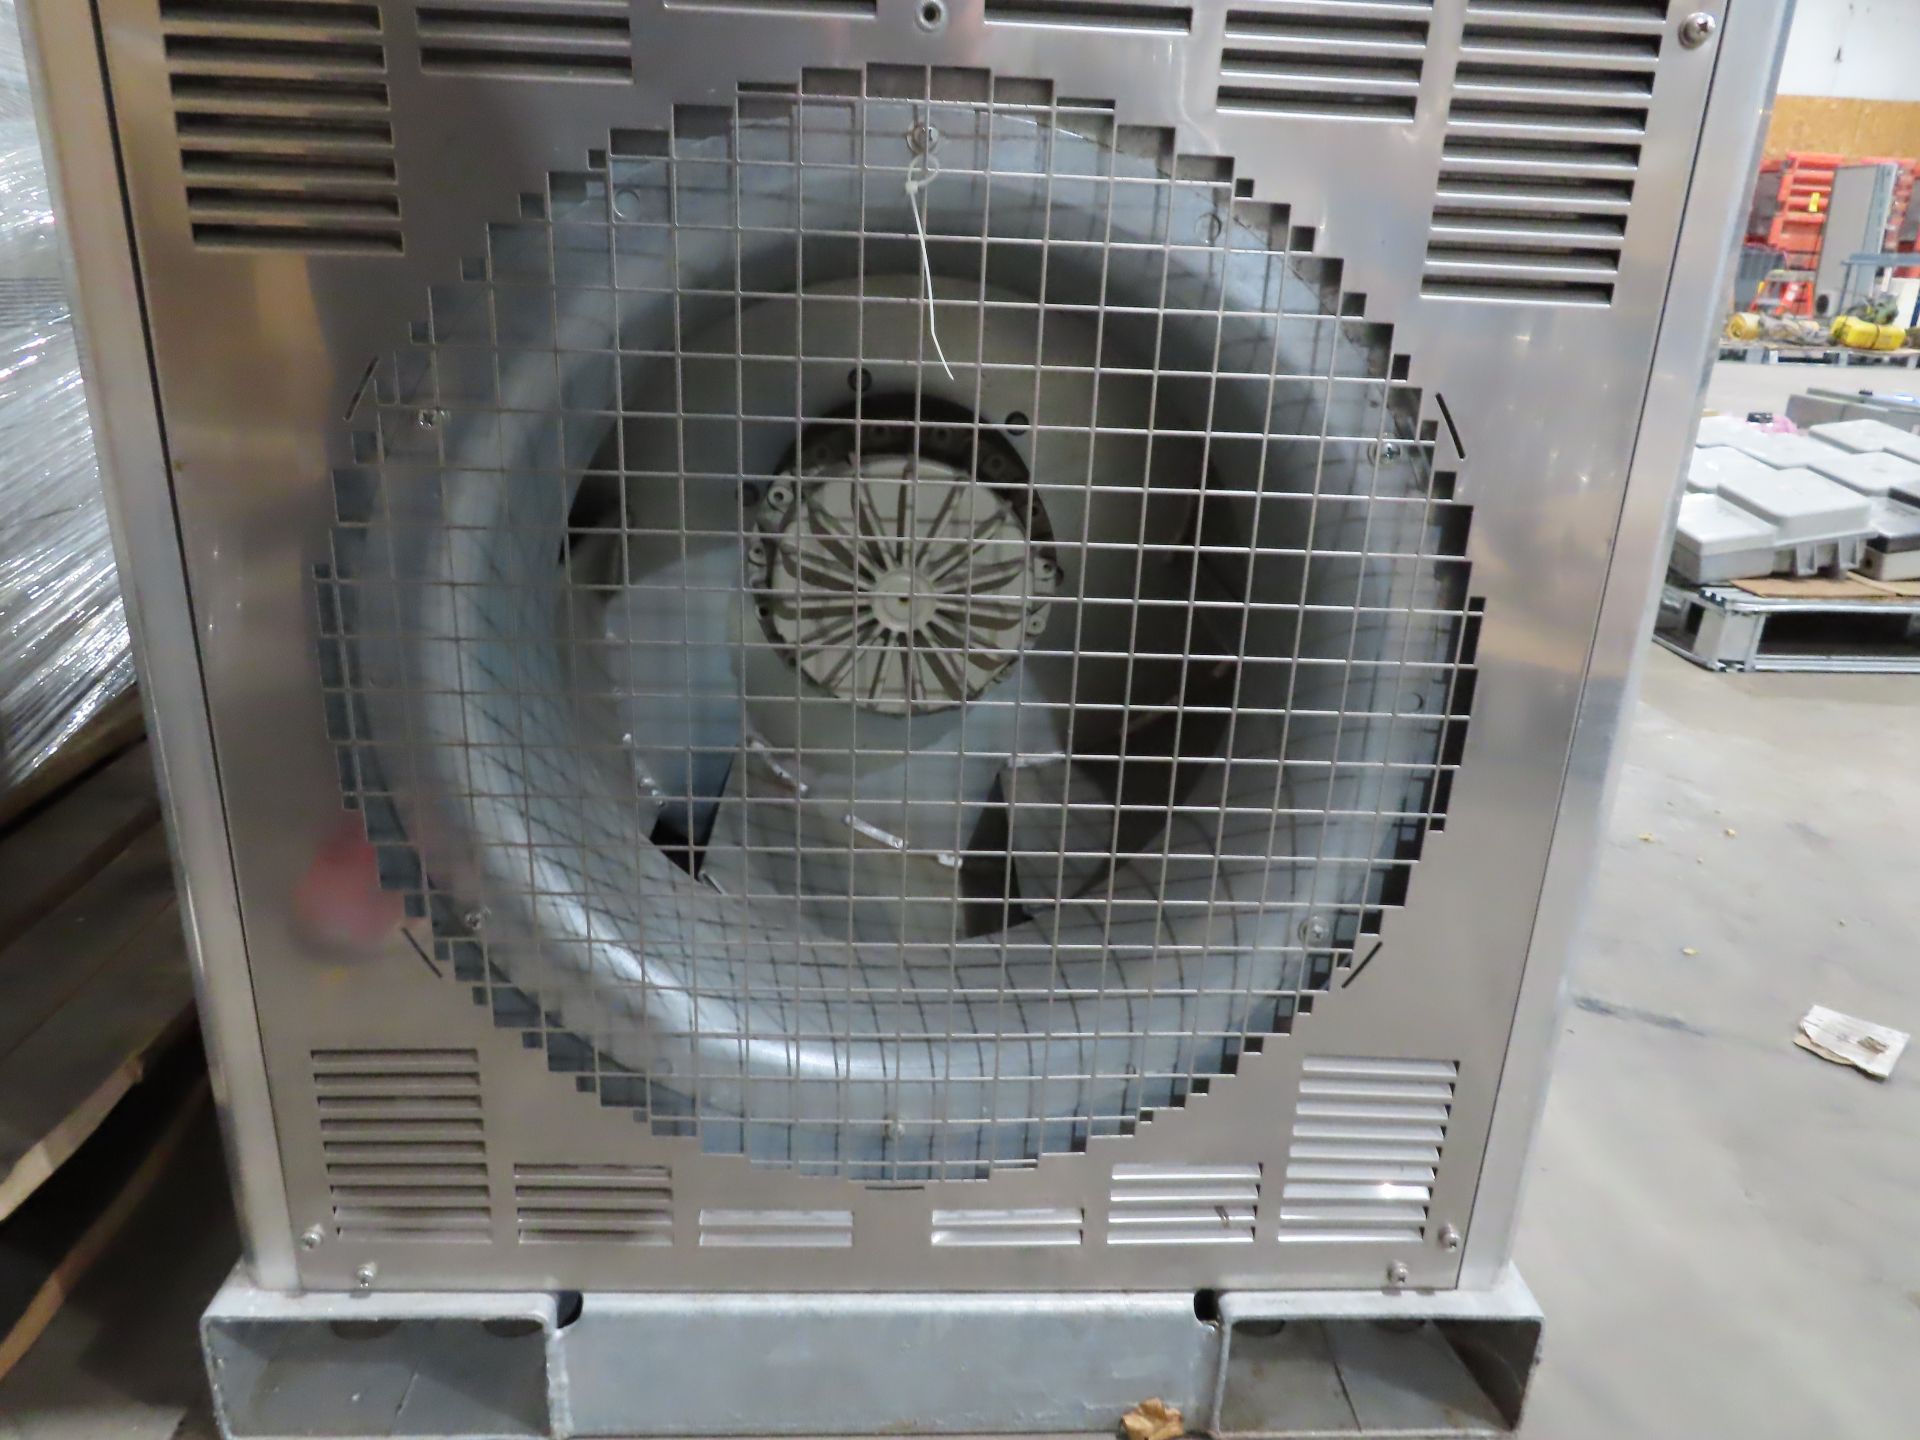 Thermobile Model IMAC-2000SG construction heater, 650,000btu, new old stock with zero hours, as - Image 3 of 7